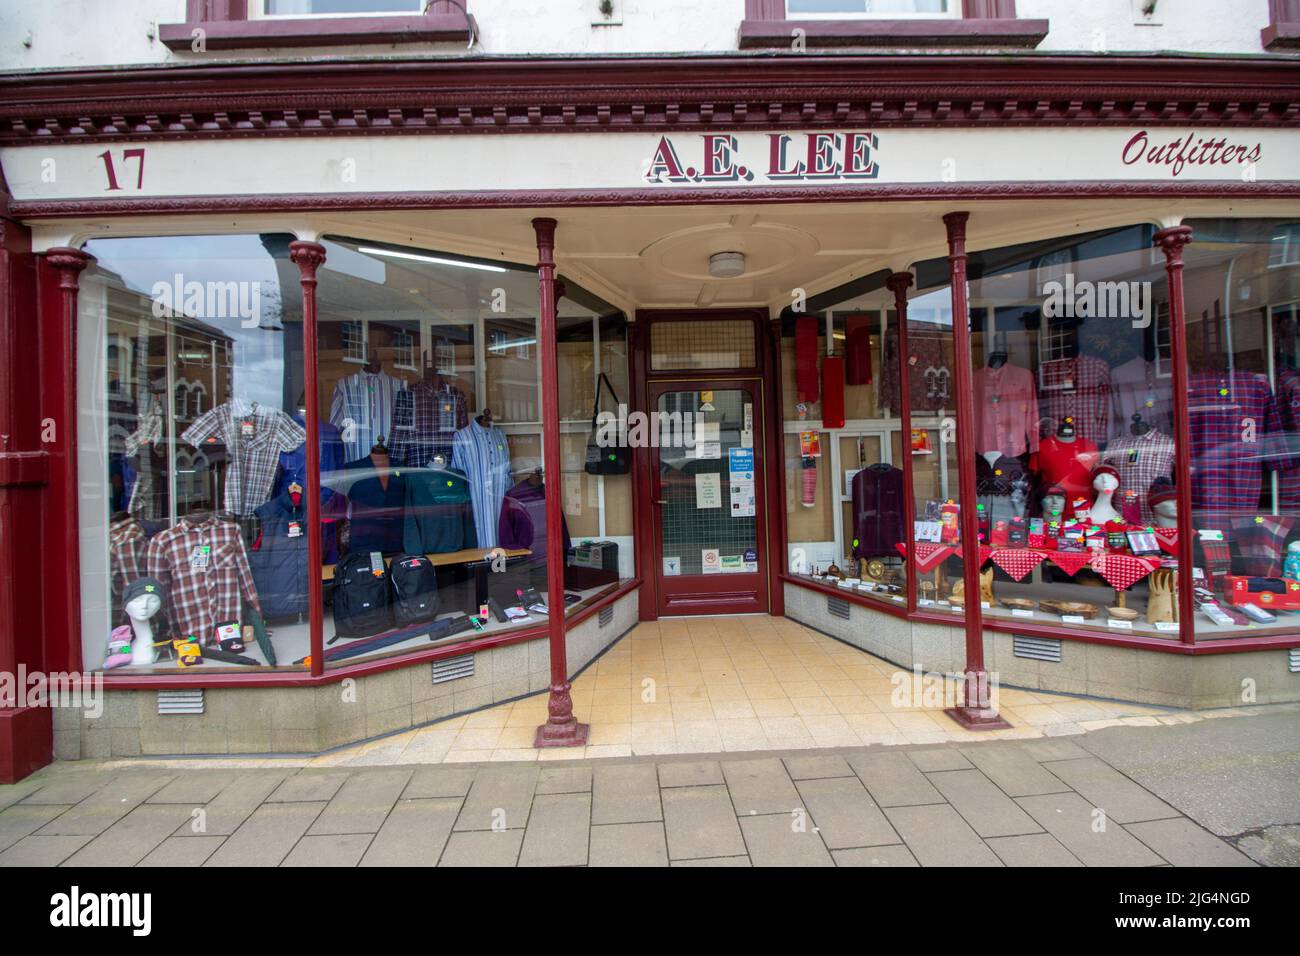 CREDITON, DEVON, UK - APRIL 6, 2022 A. E. Lee Outfitters on the High Street Stock Photo